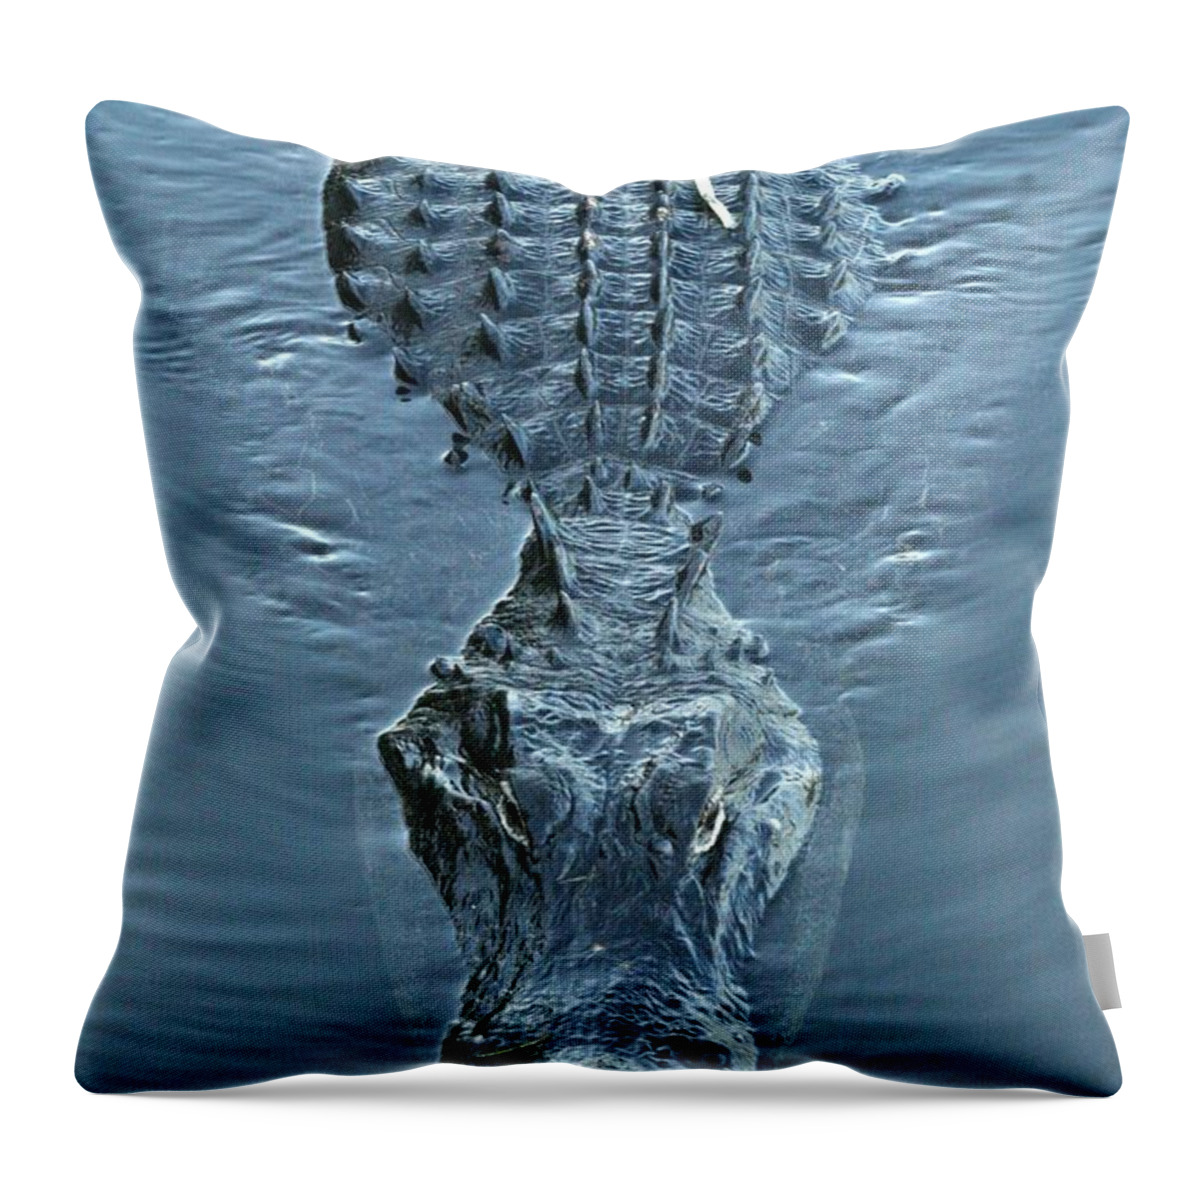 Alligator Throw Pillow featuring the photograph Submerged Alligator Approach by Ian McAdie